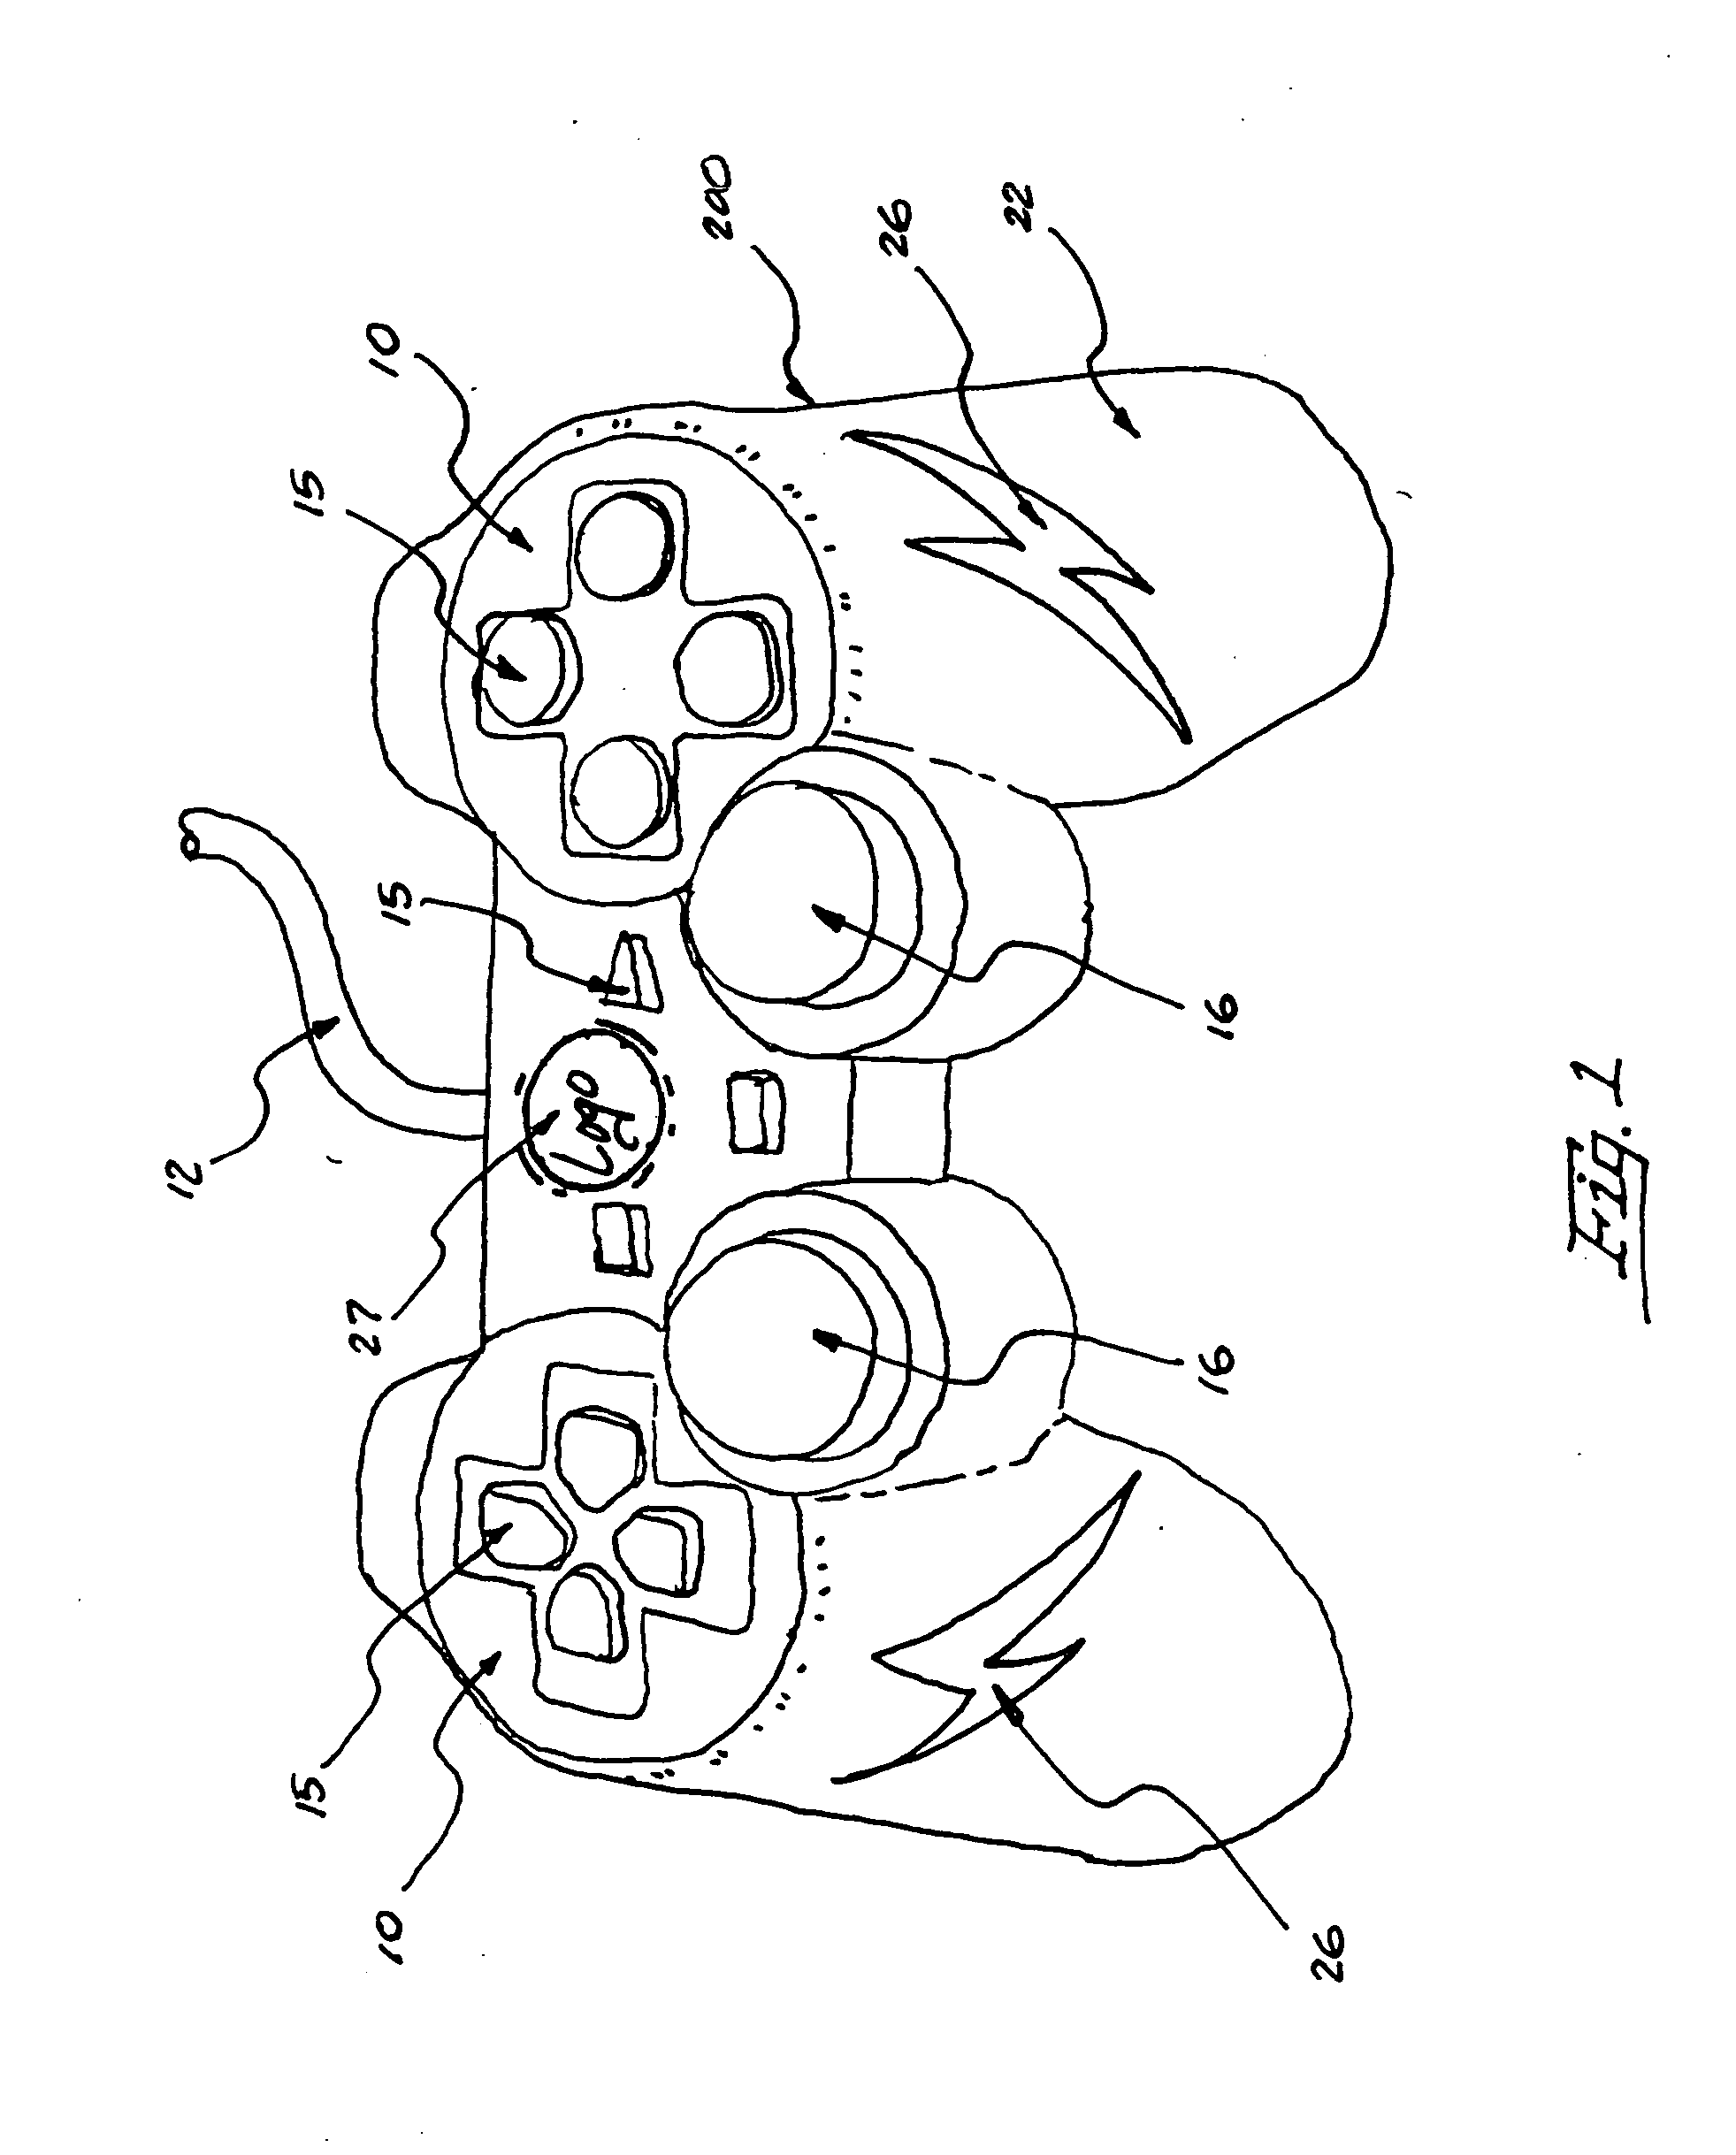 Cover for a video game controller